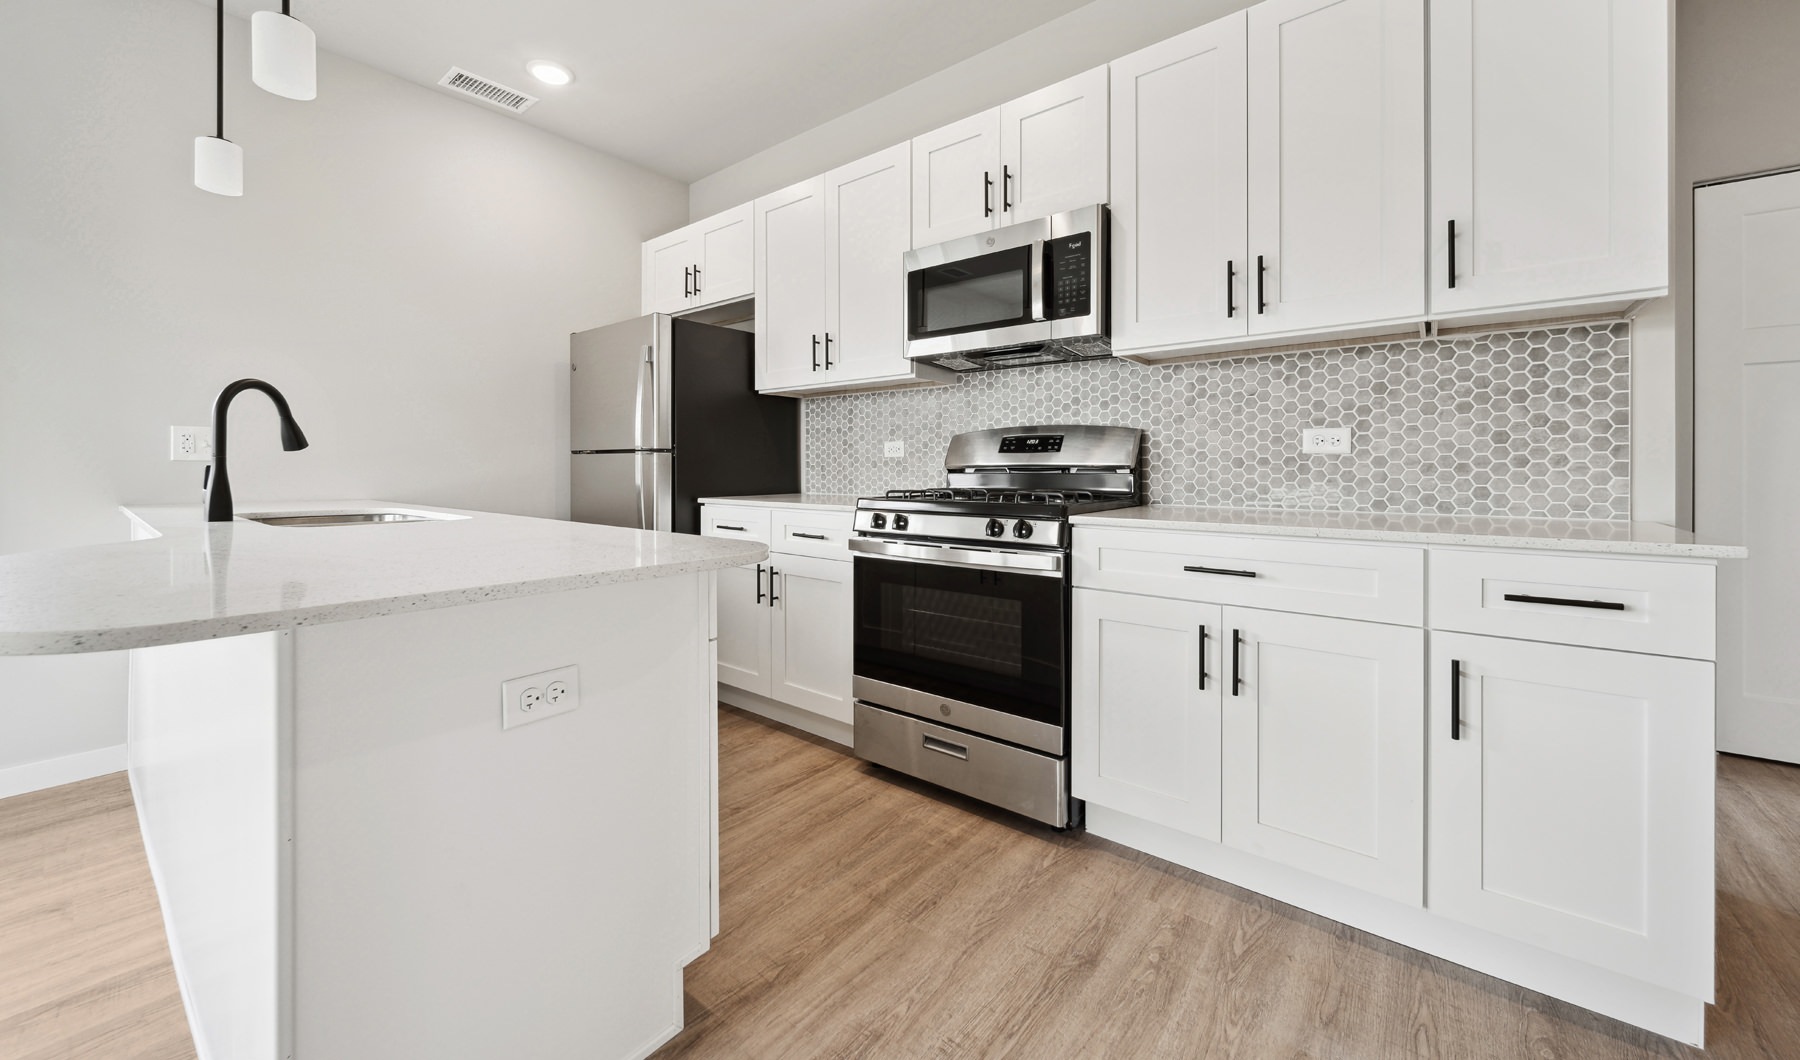 Discover Luxury at The Hartford Apartments in Homewood, IL